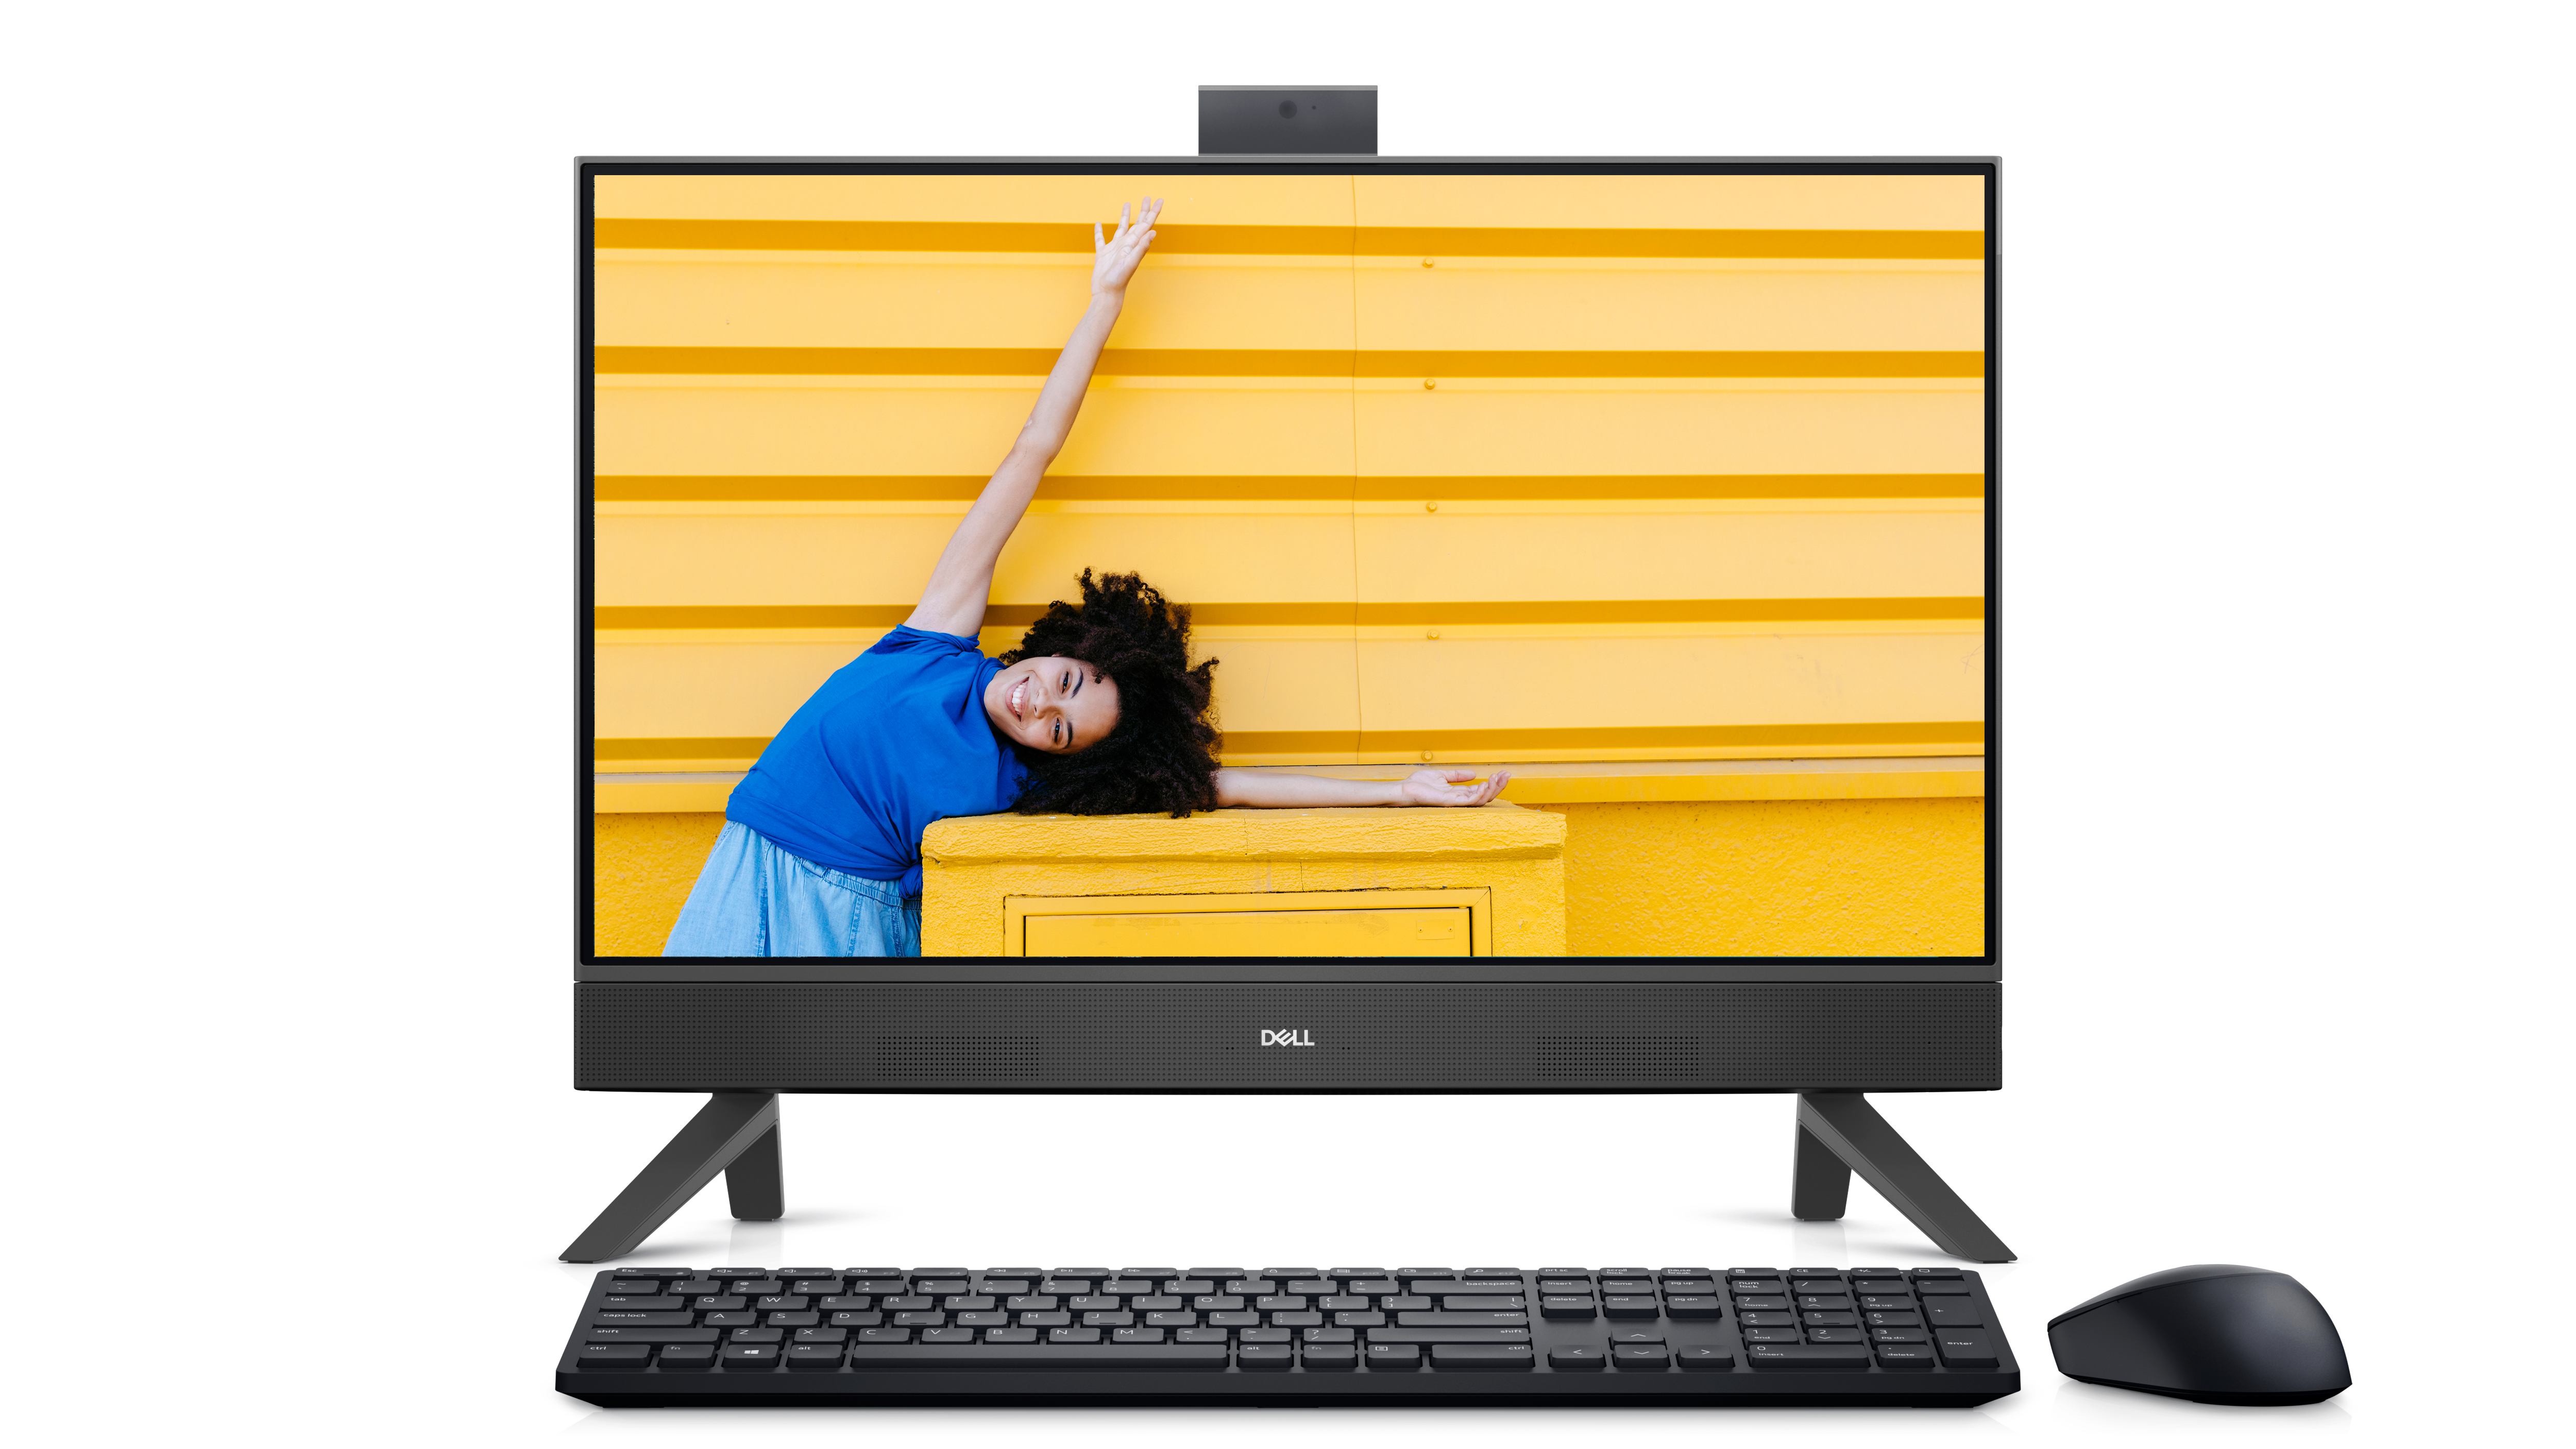 Picture of a black Dell Inspiron 24 5415 All-in-One with a smiley girl in front of a yellow wall on the monitor screen.